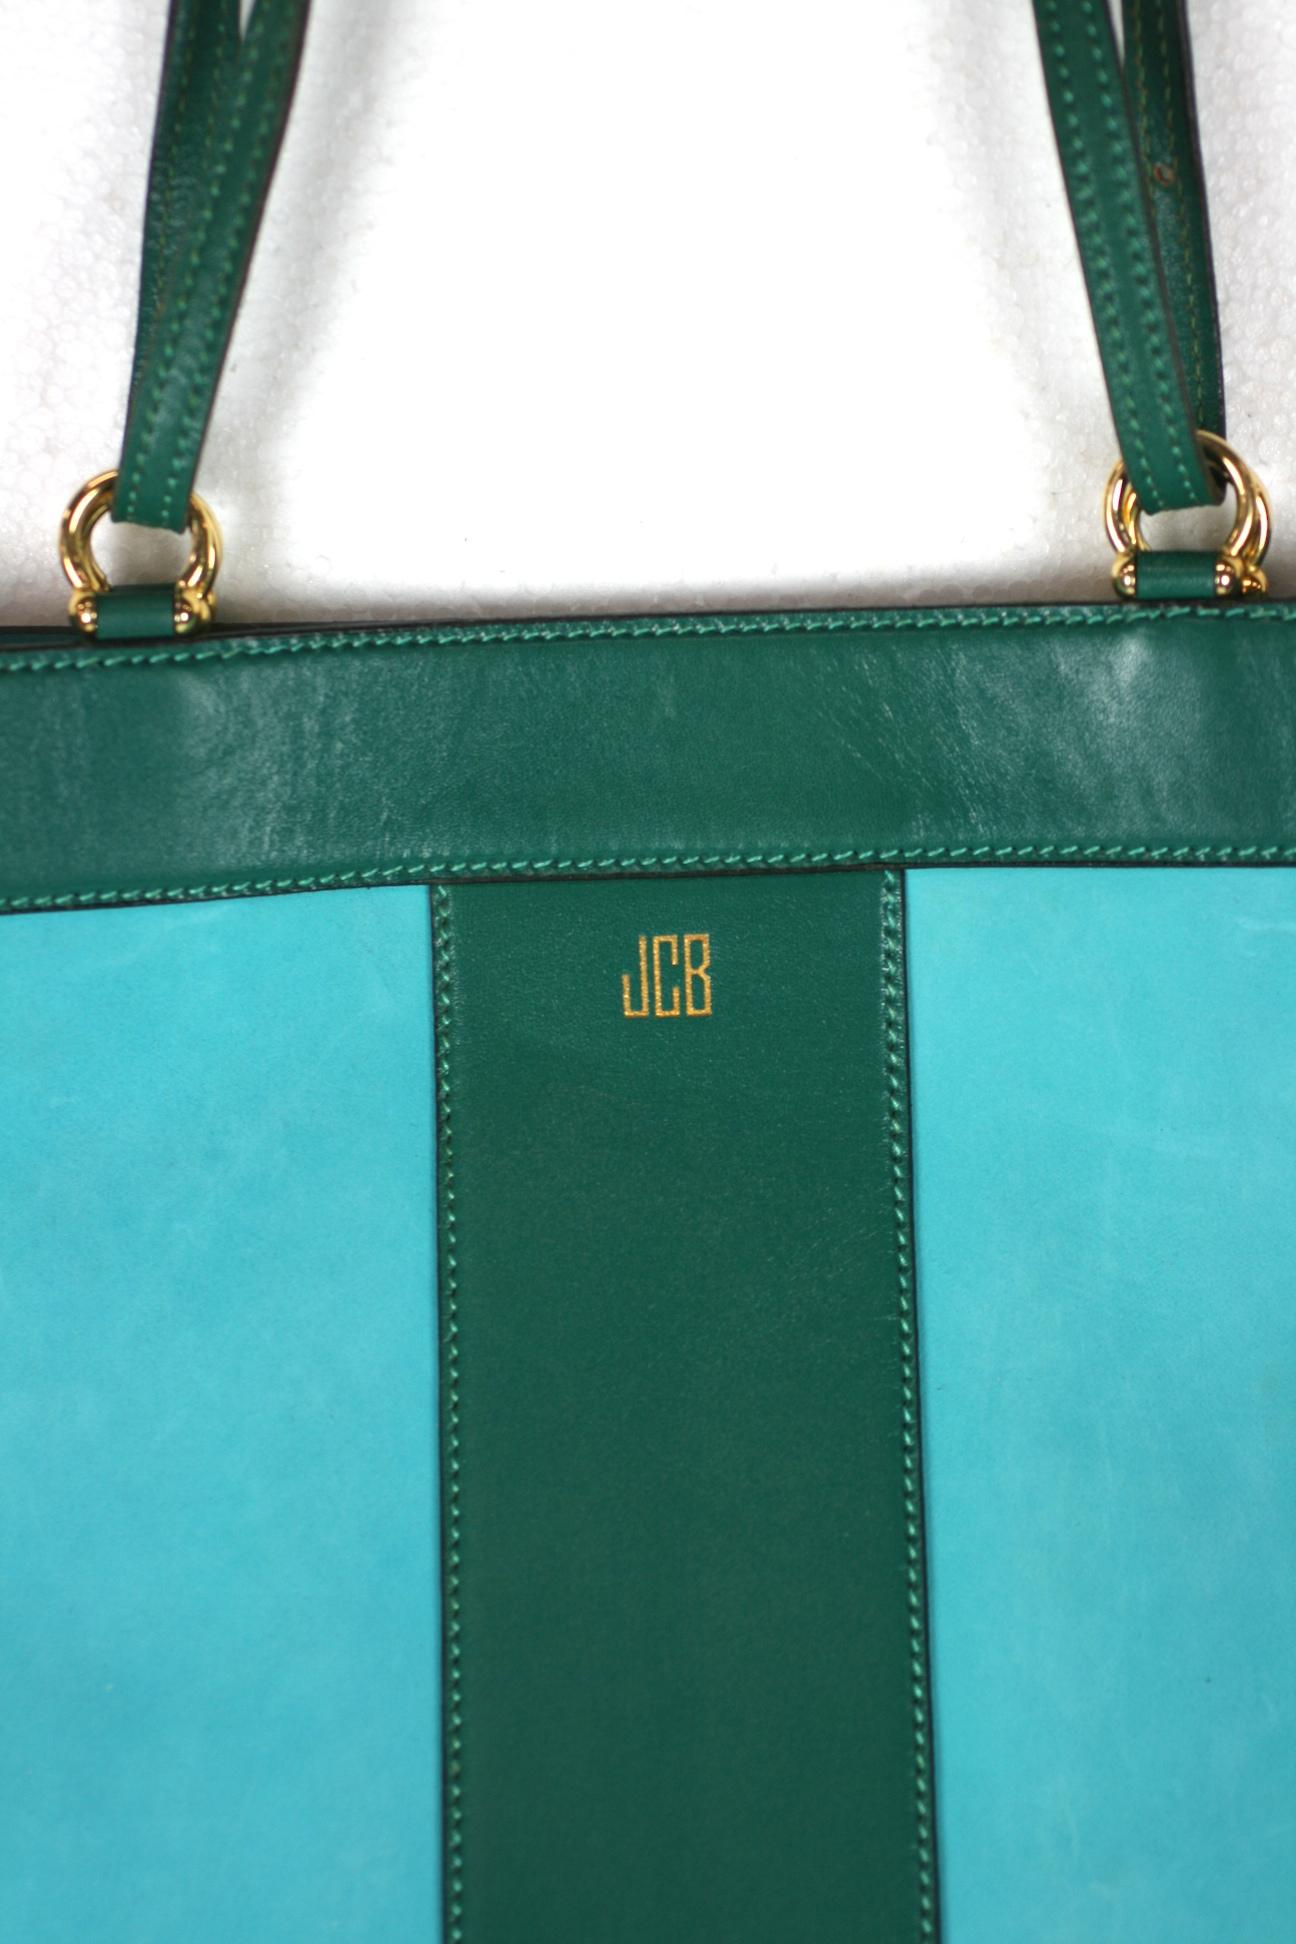 Mark Cross Turquoise and Evergreen Calf Tote with original gold monogram.  Bag expands at top of open wide but narrows at base. Unusual and striking color combination, beautiful quality leather with long belted handle that doubles or can be used on